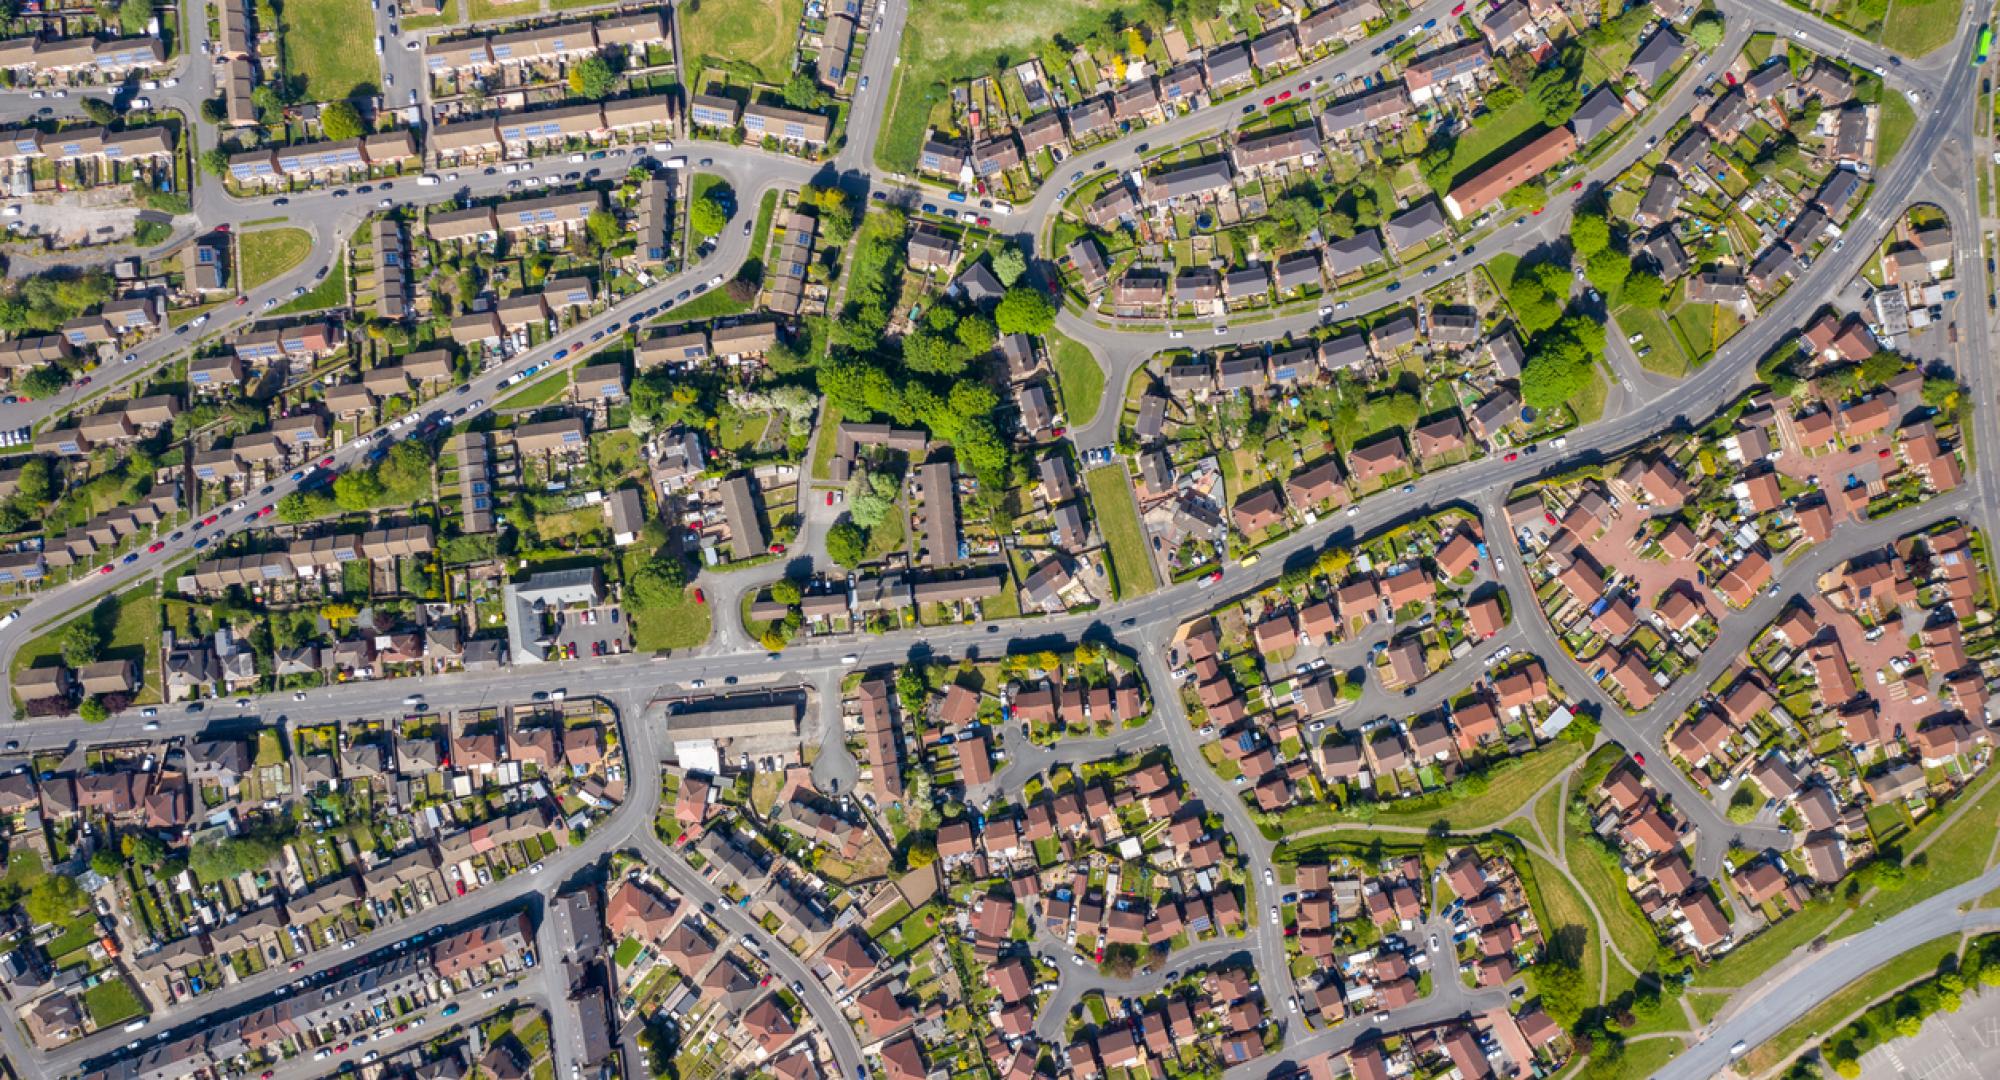 Top down aerial photo of the British town of Middleton in Leeds West Yorkshire